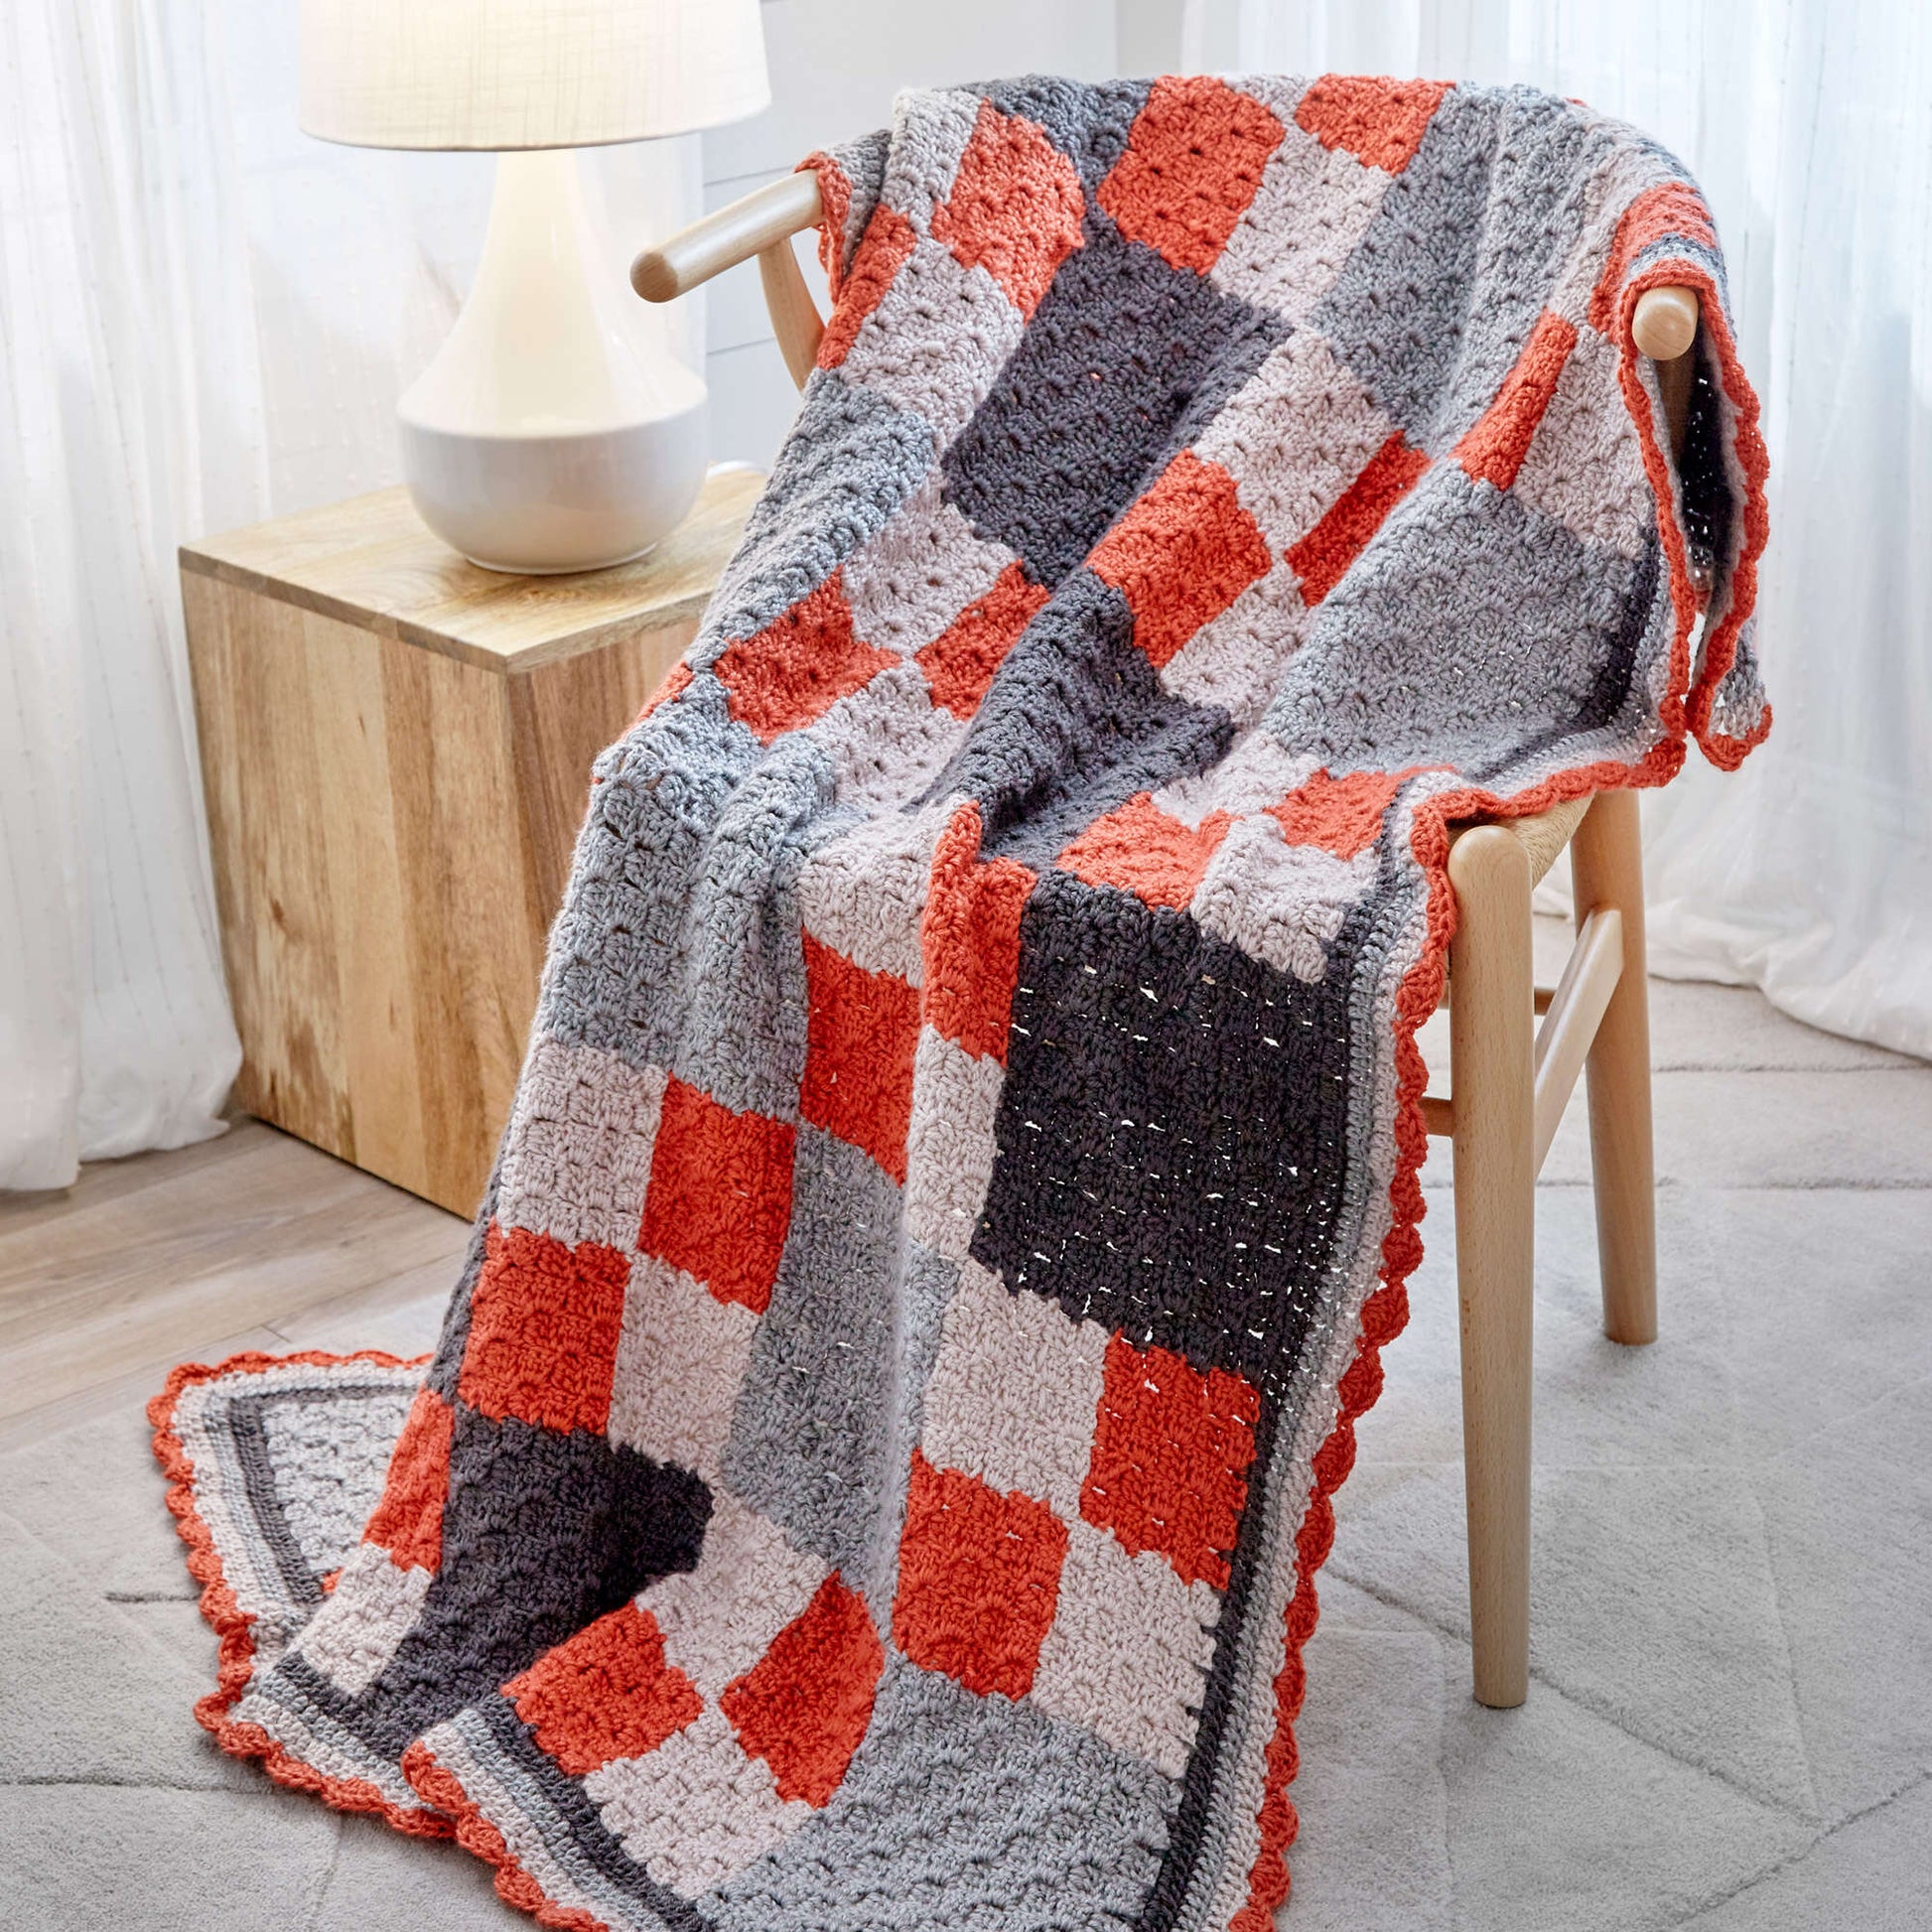 Free Red Heart Four-Patch Throw Pattern